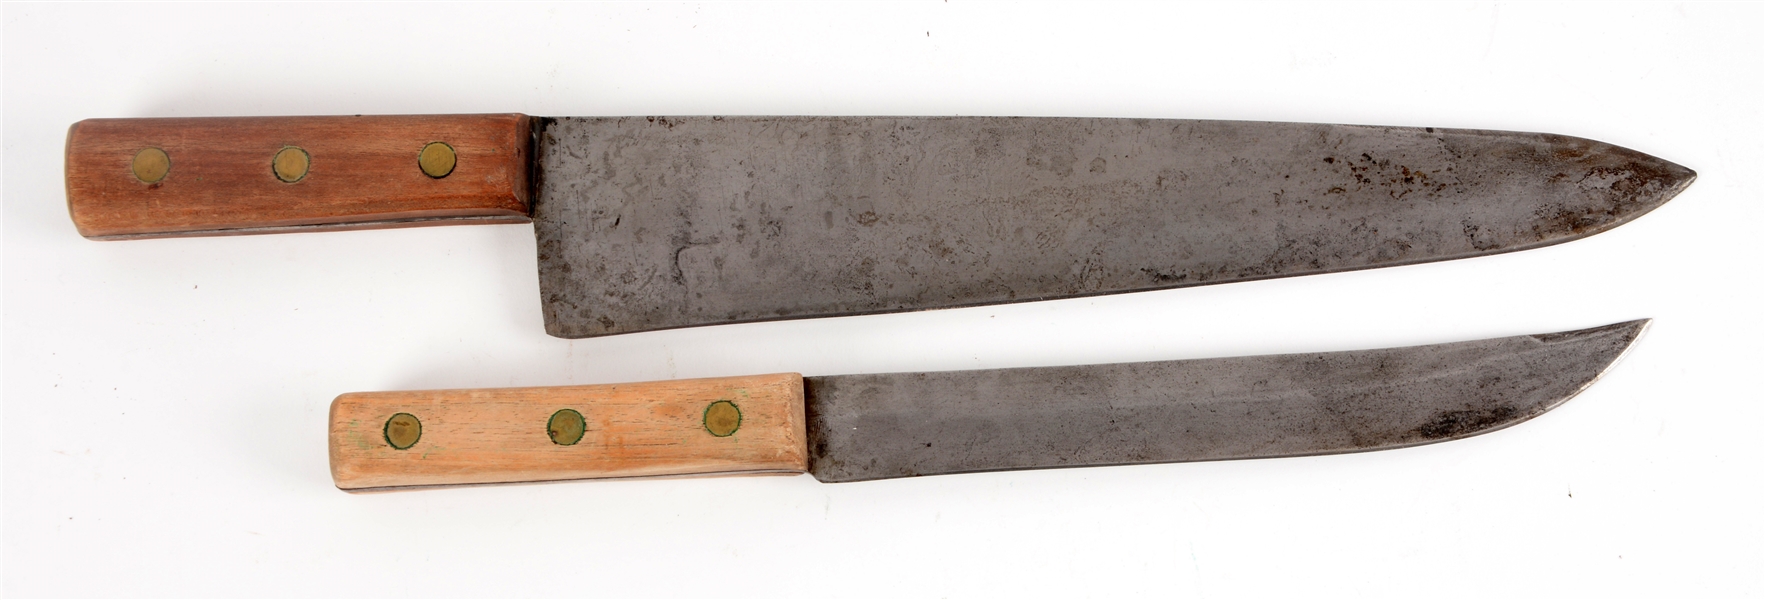 LOT OF 2: R.H. RUANA PAIR OF KITCHEN KNIVES. 